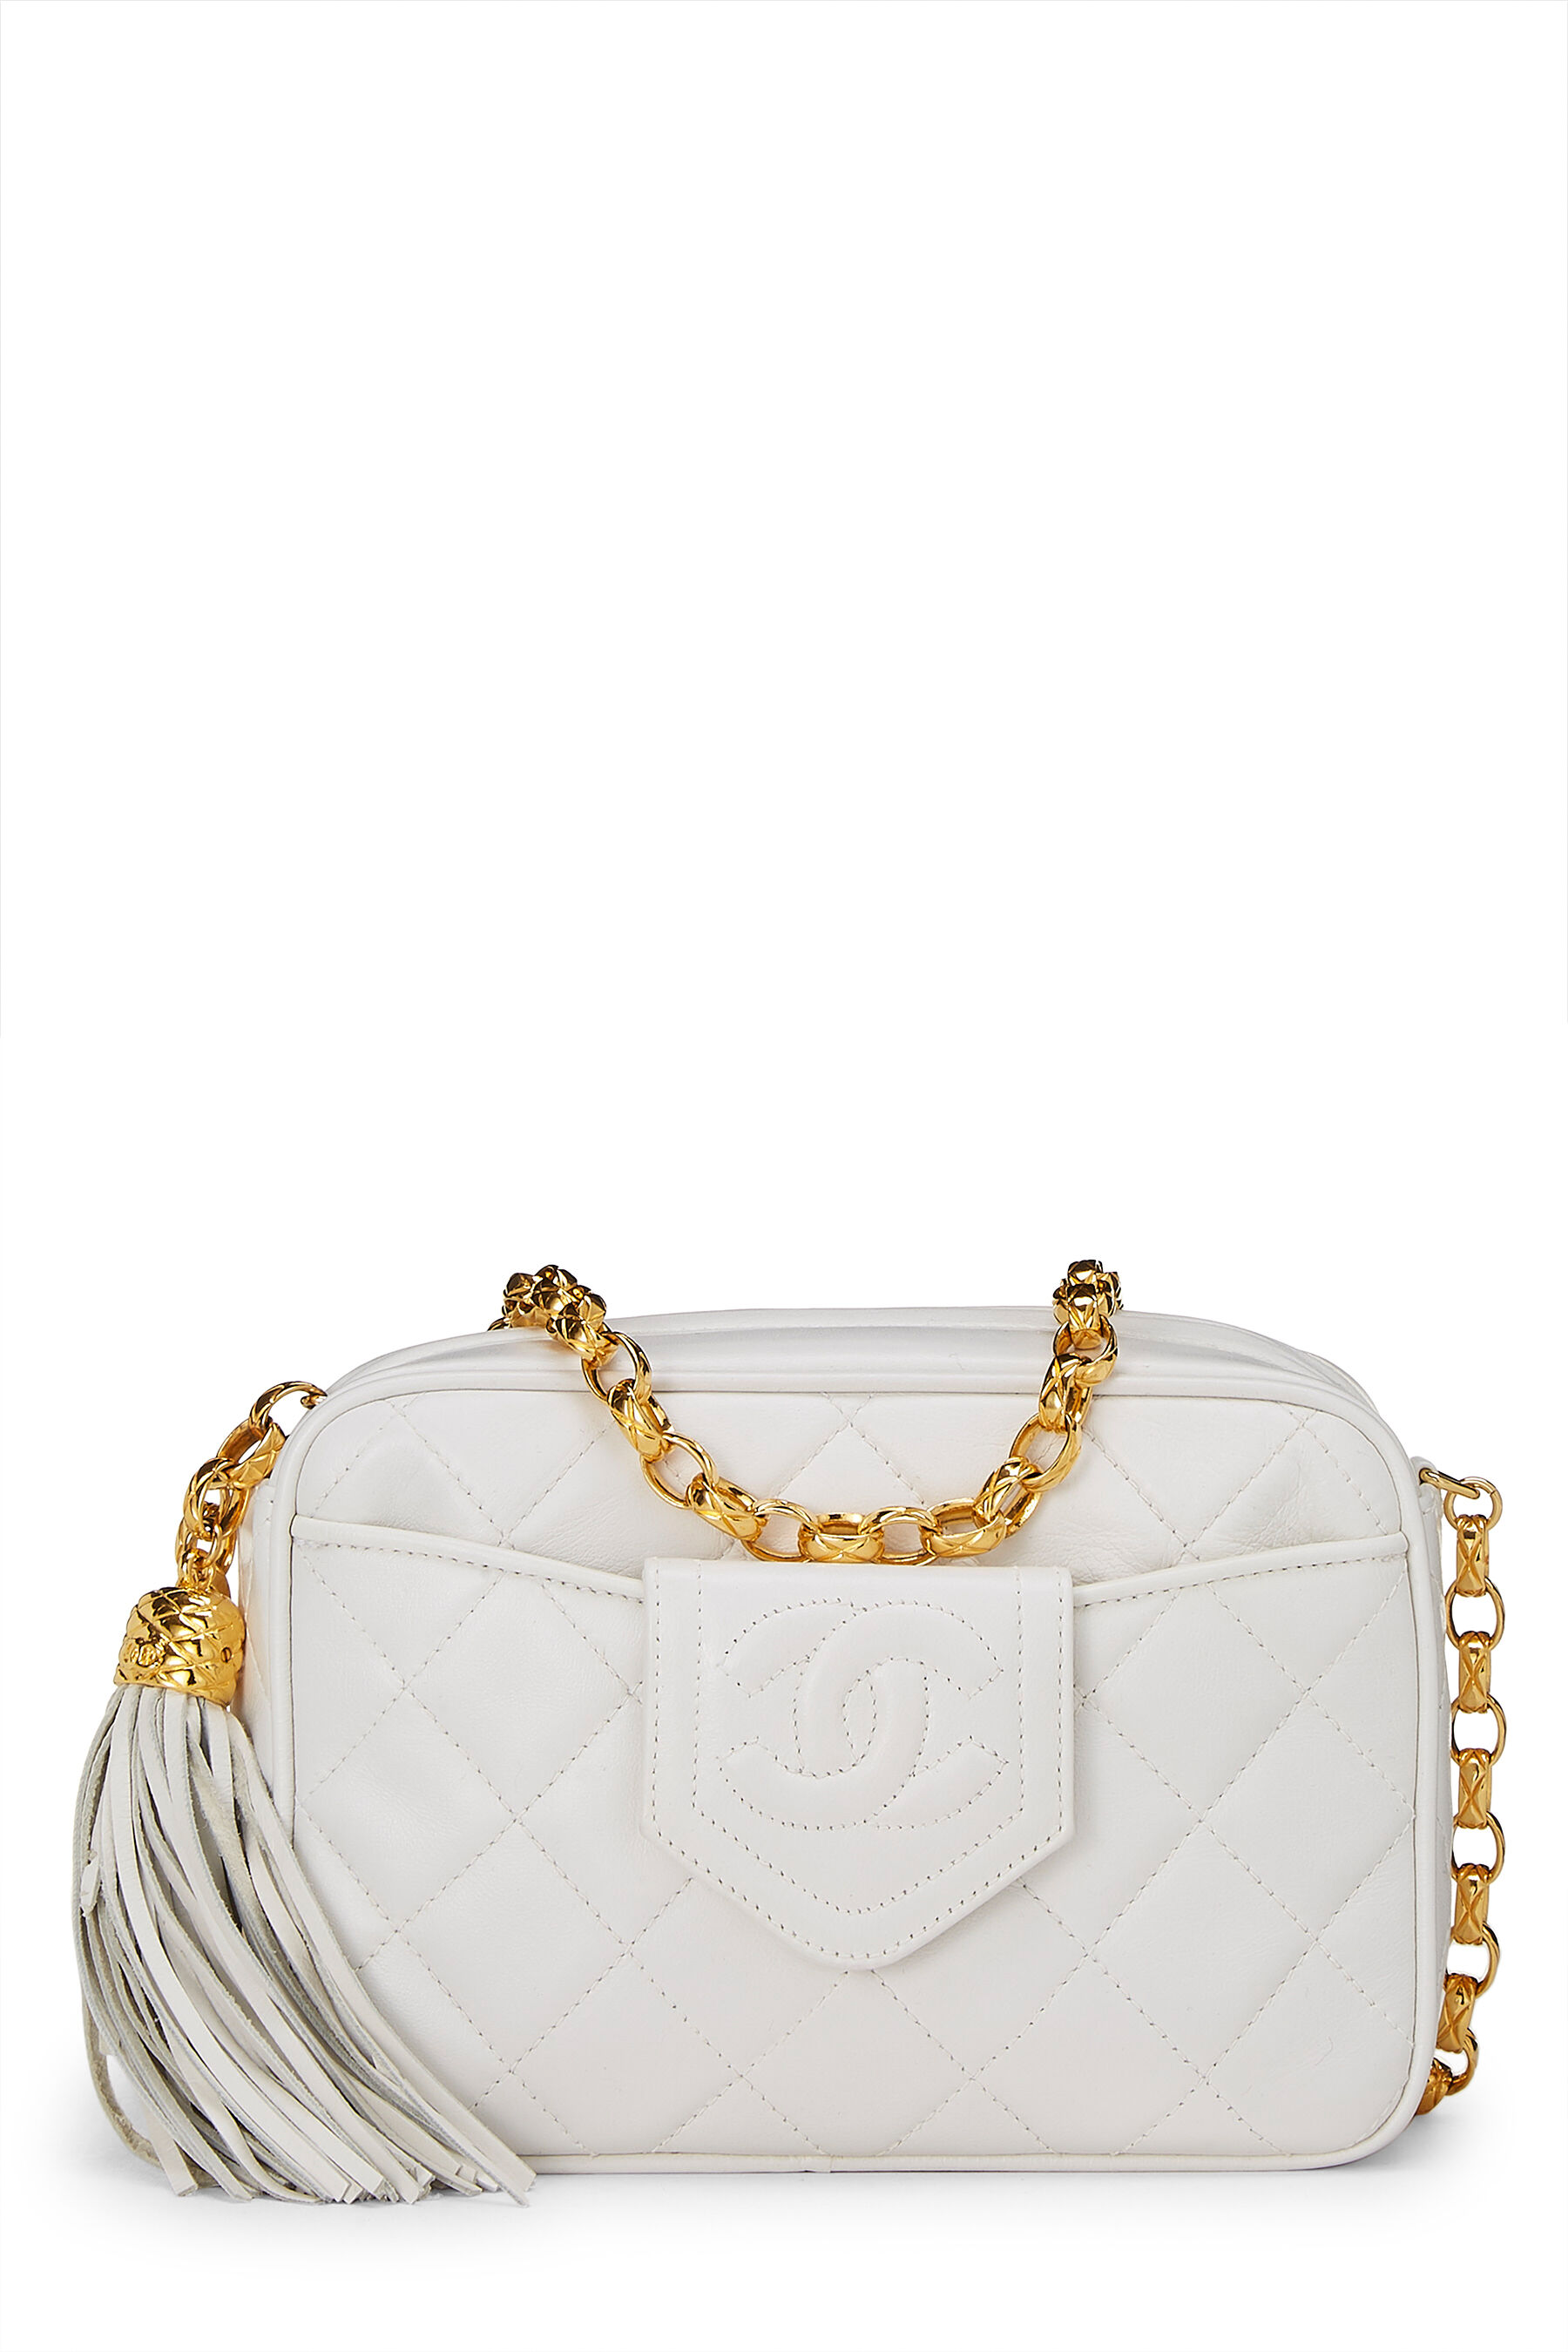 Chanel - White Quilted Lambskin Pocket Camera Bag Mini